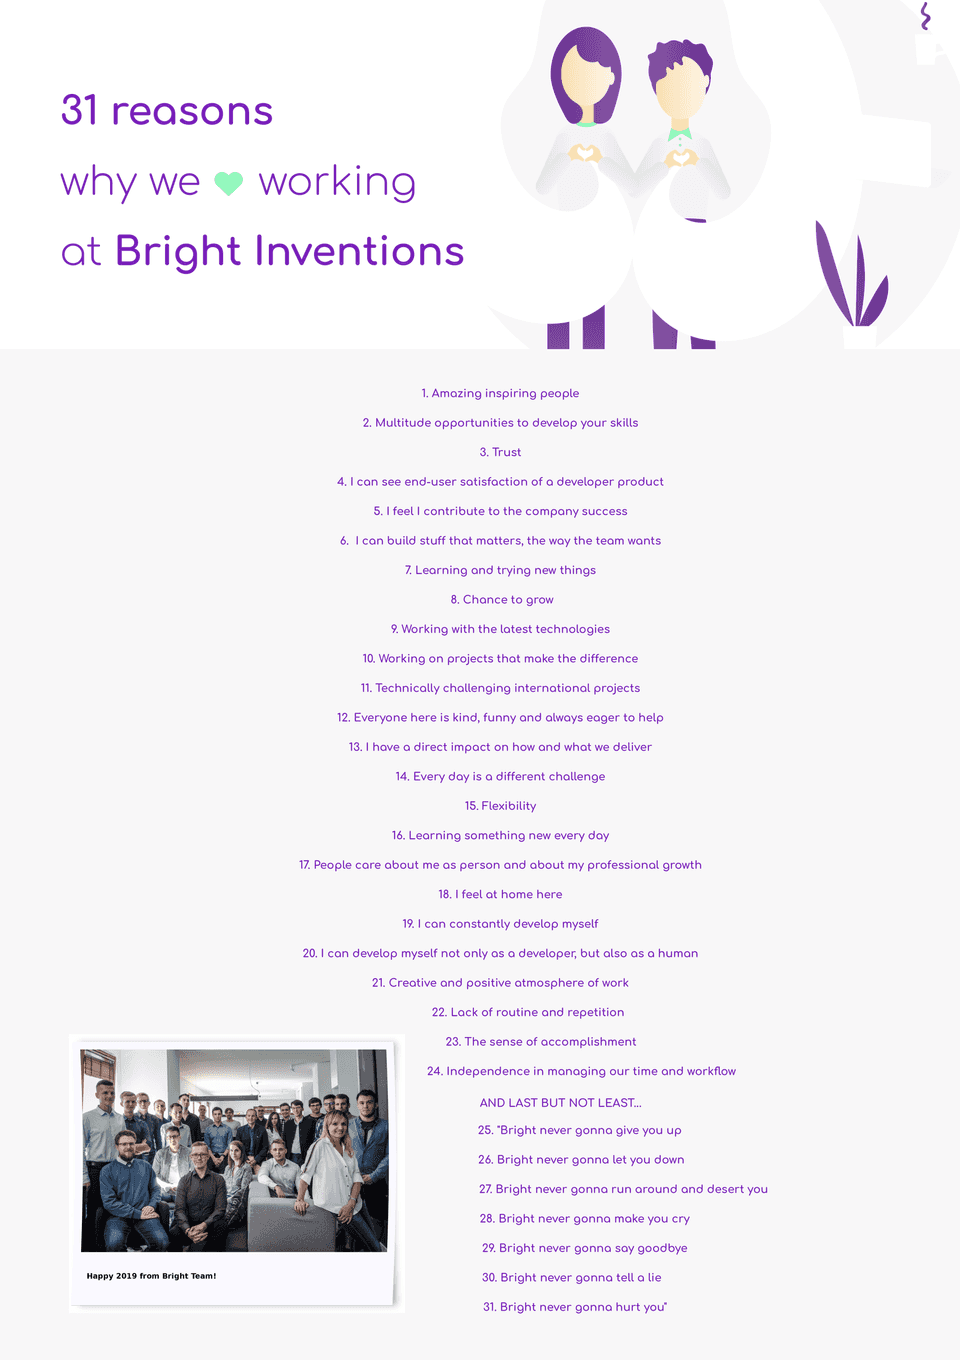 31 reasons why we love working at Bright Inventions